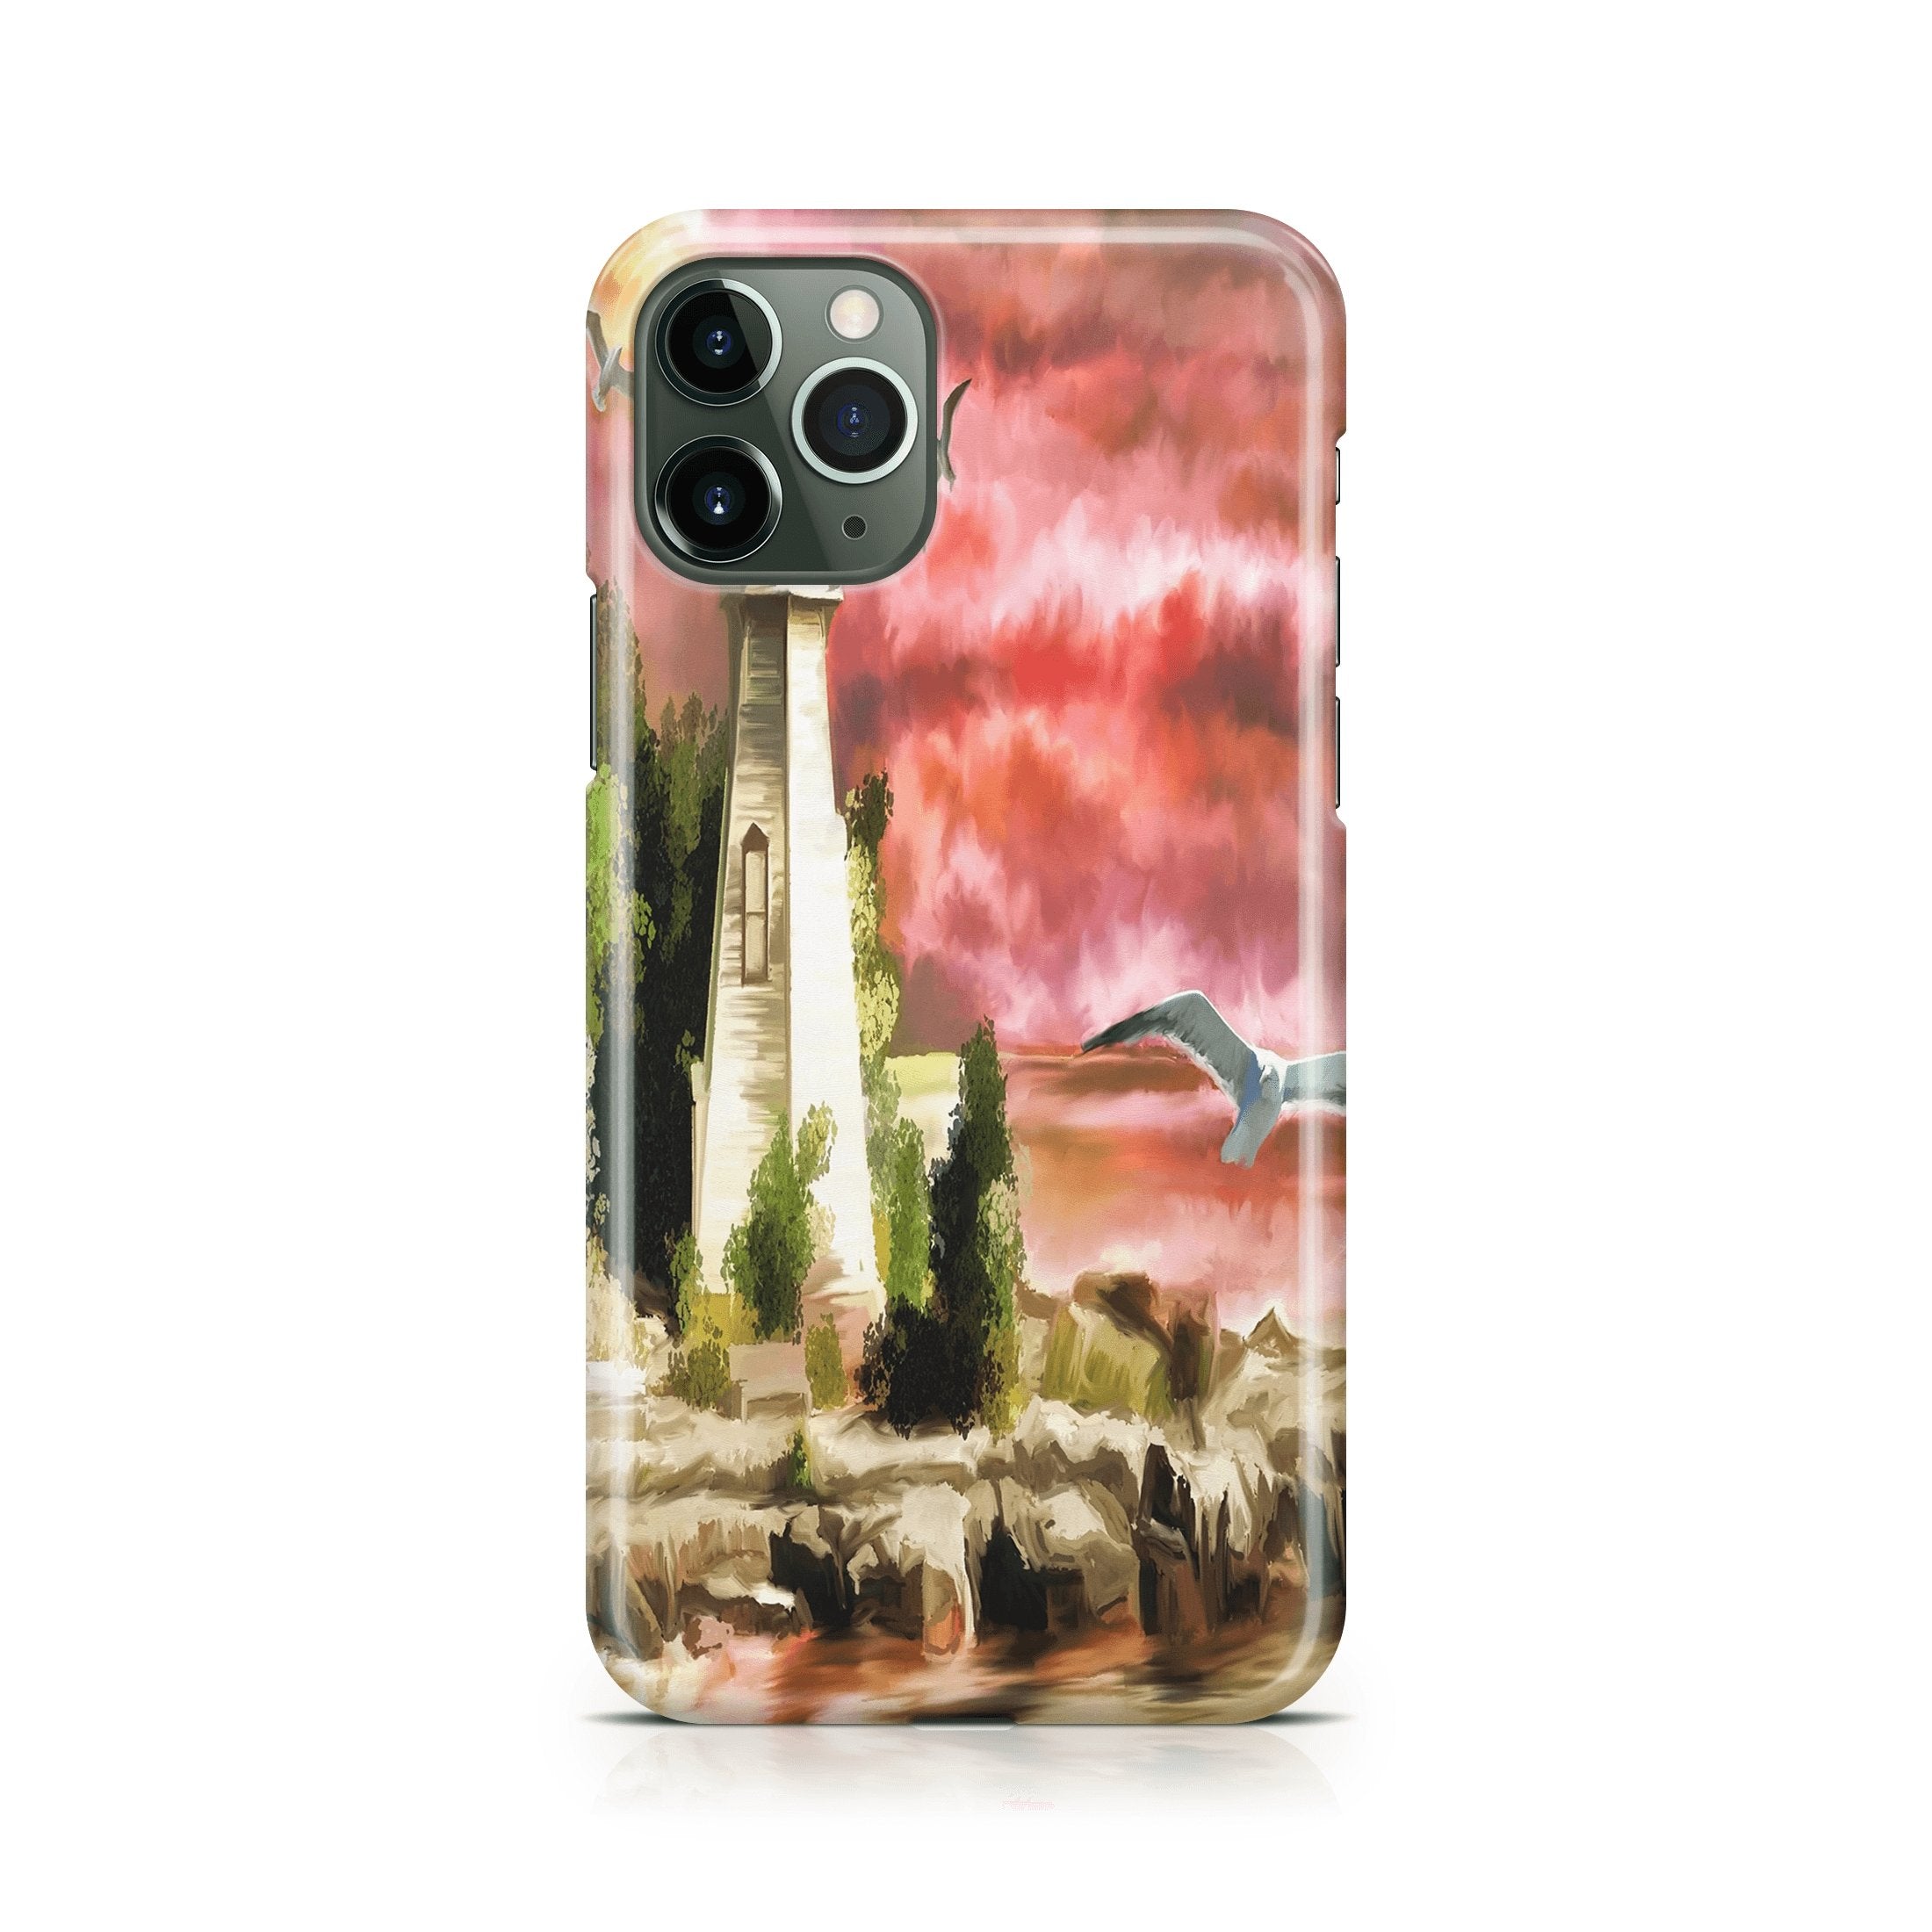 Lighthouse - iPhone phone case designs by CaseSwagger